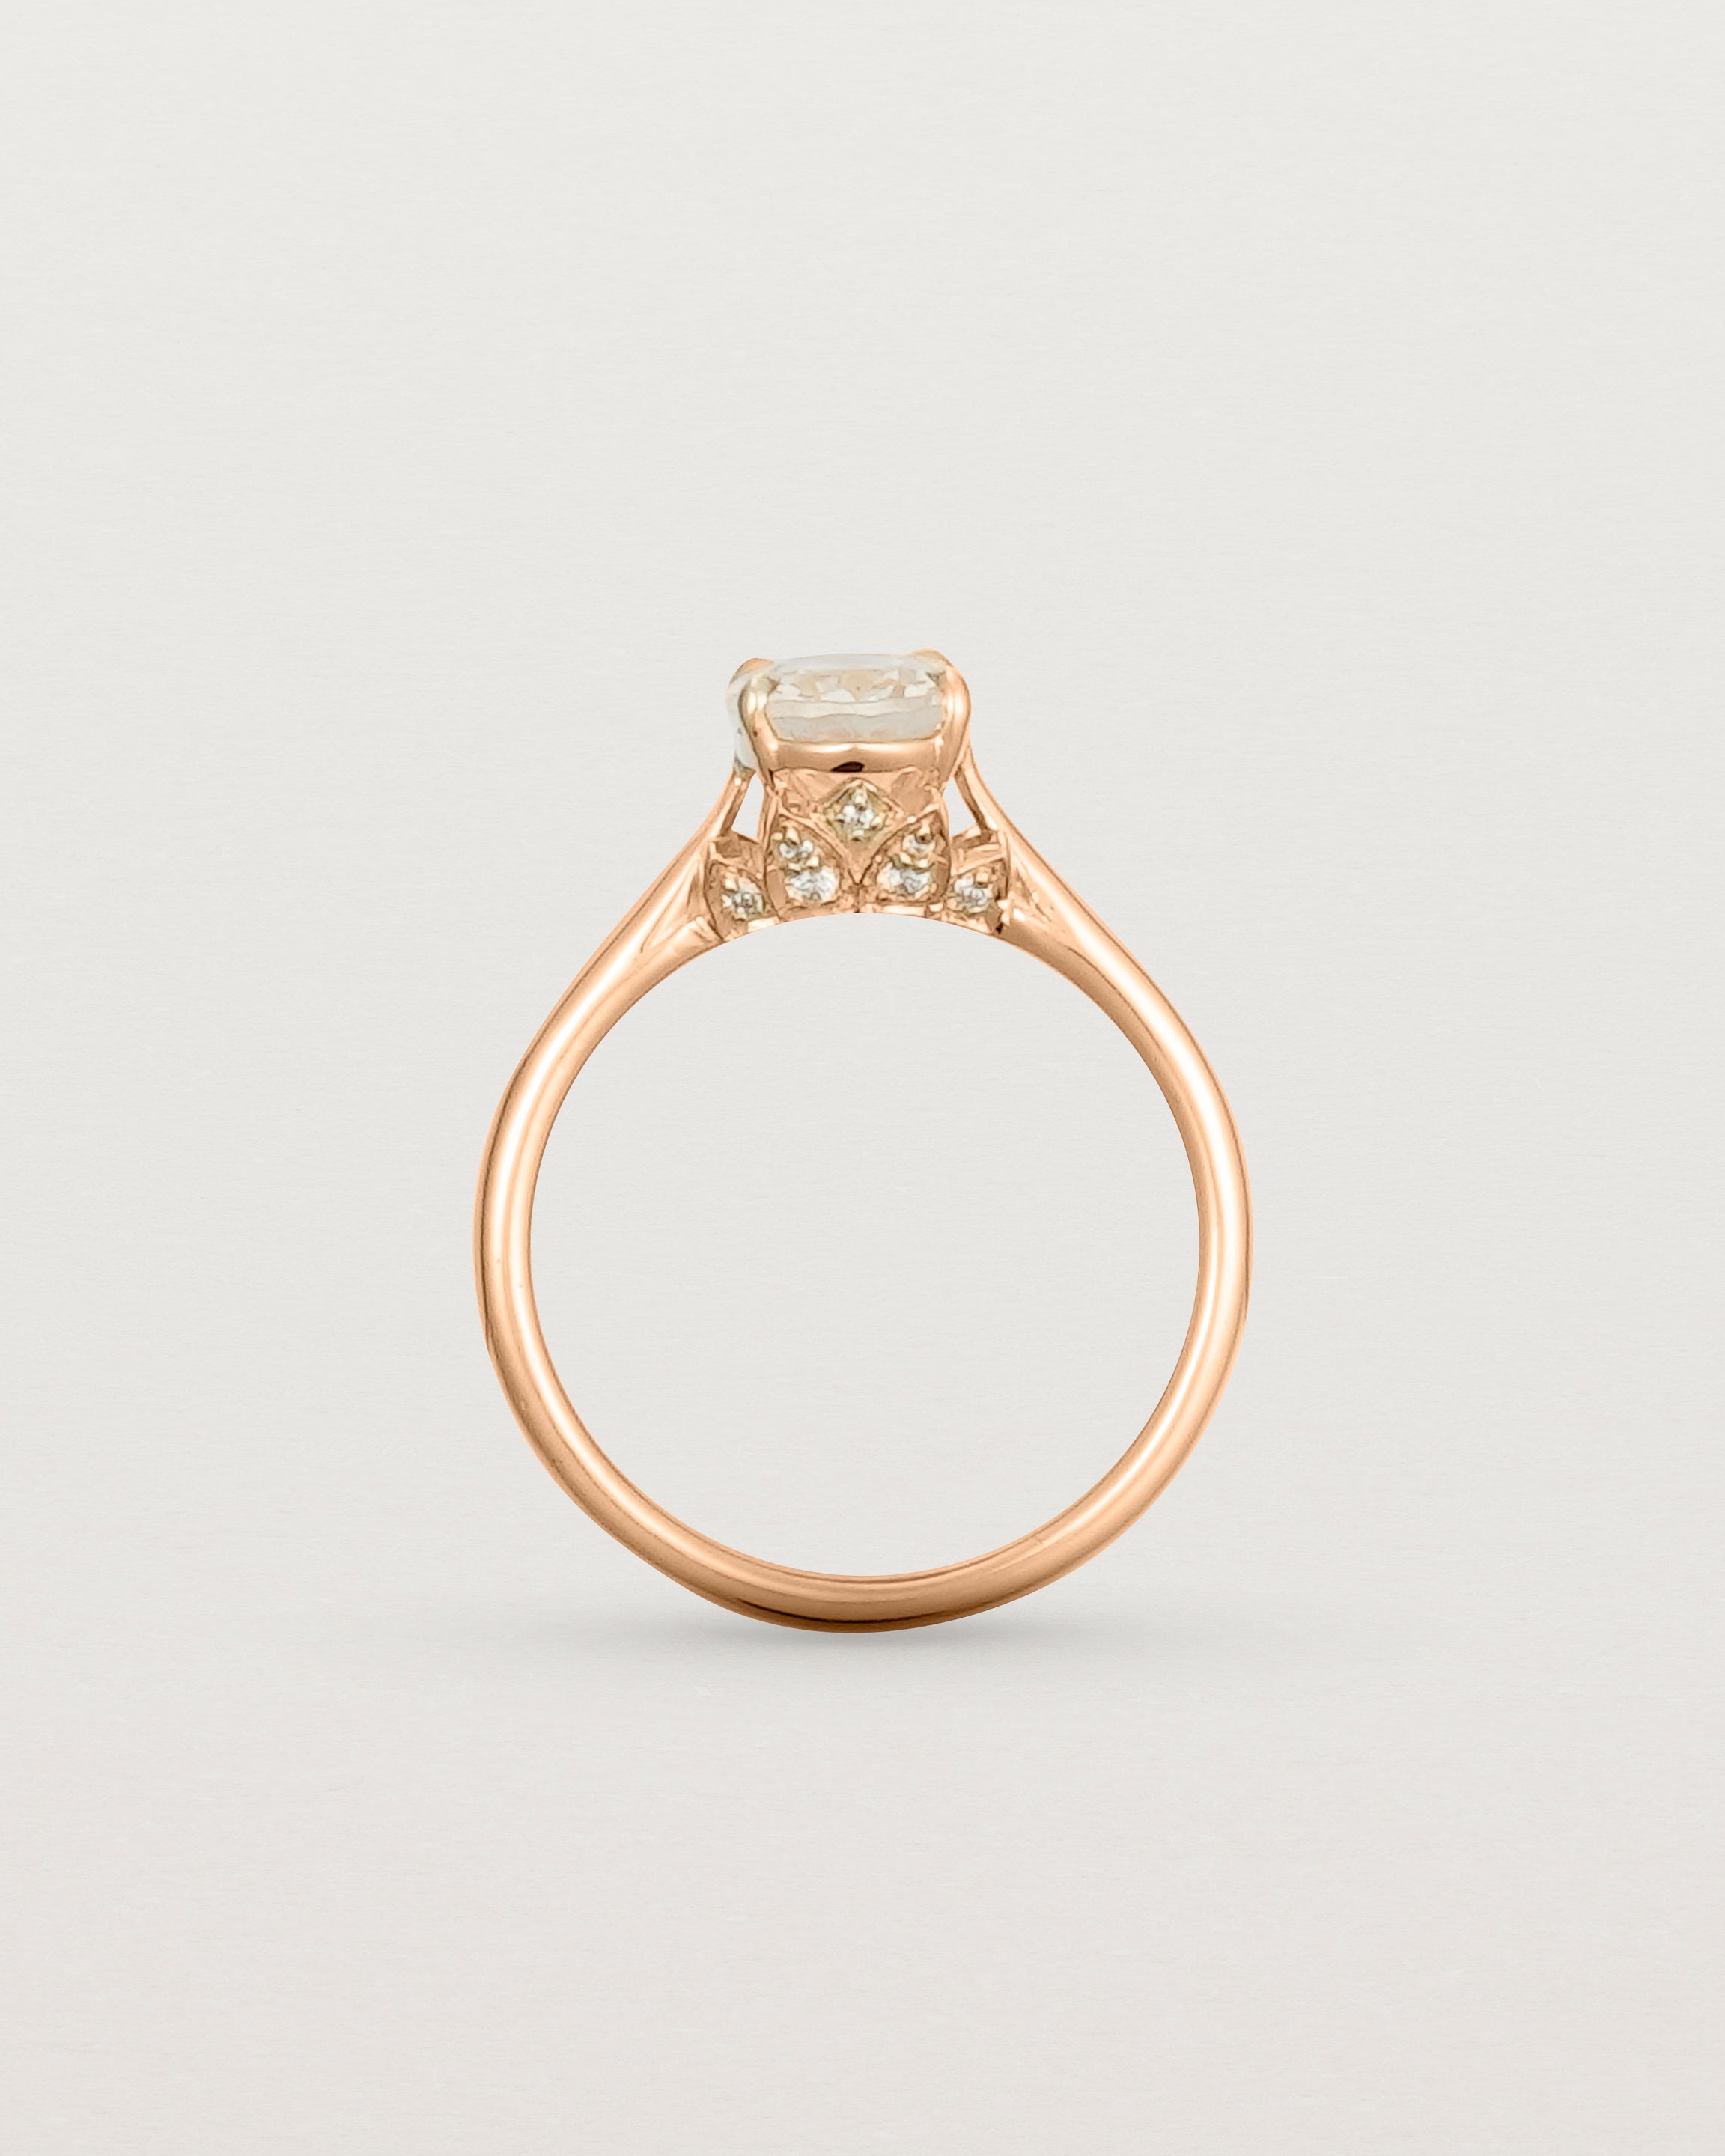 Standing view of the Kalina Oval Solitaire | Savannah Sunstone | Rose Gold.